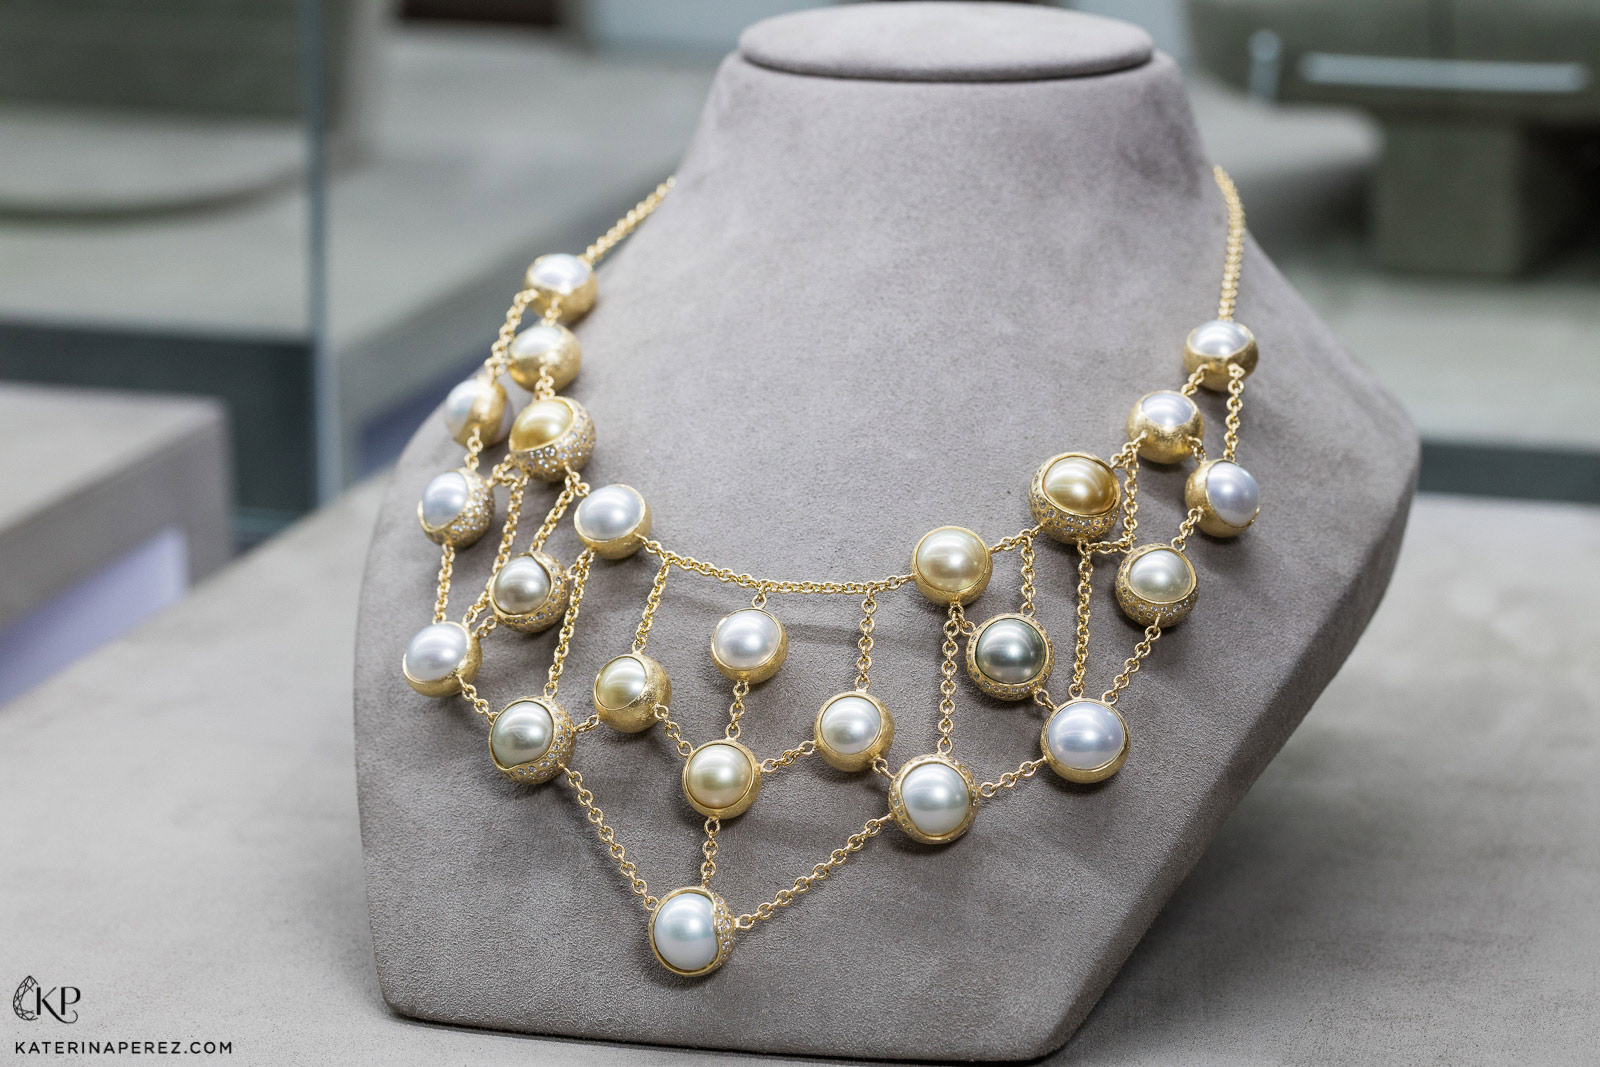 Todd Reed necklace in yellow gold with pearls. Photo credit: Simon Martner.